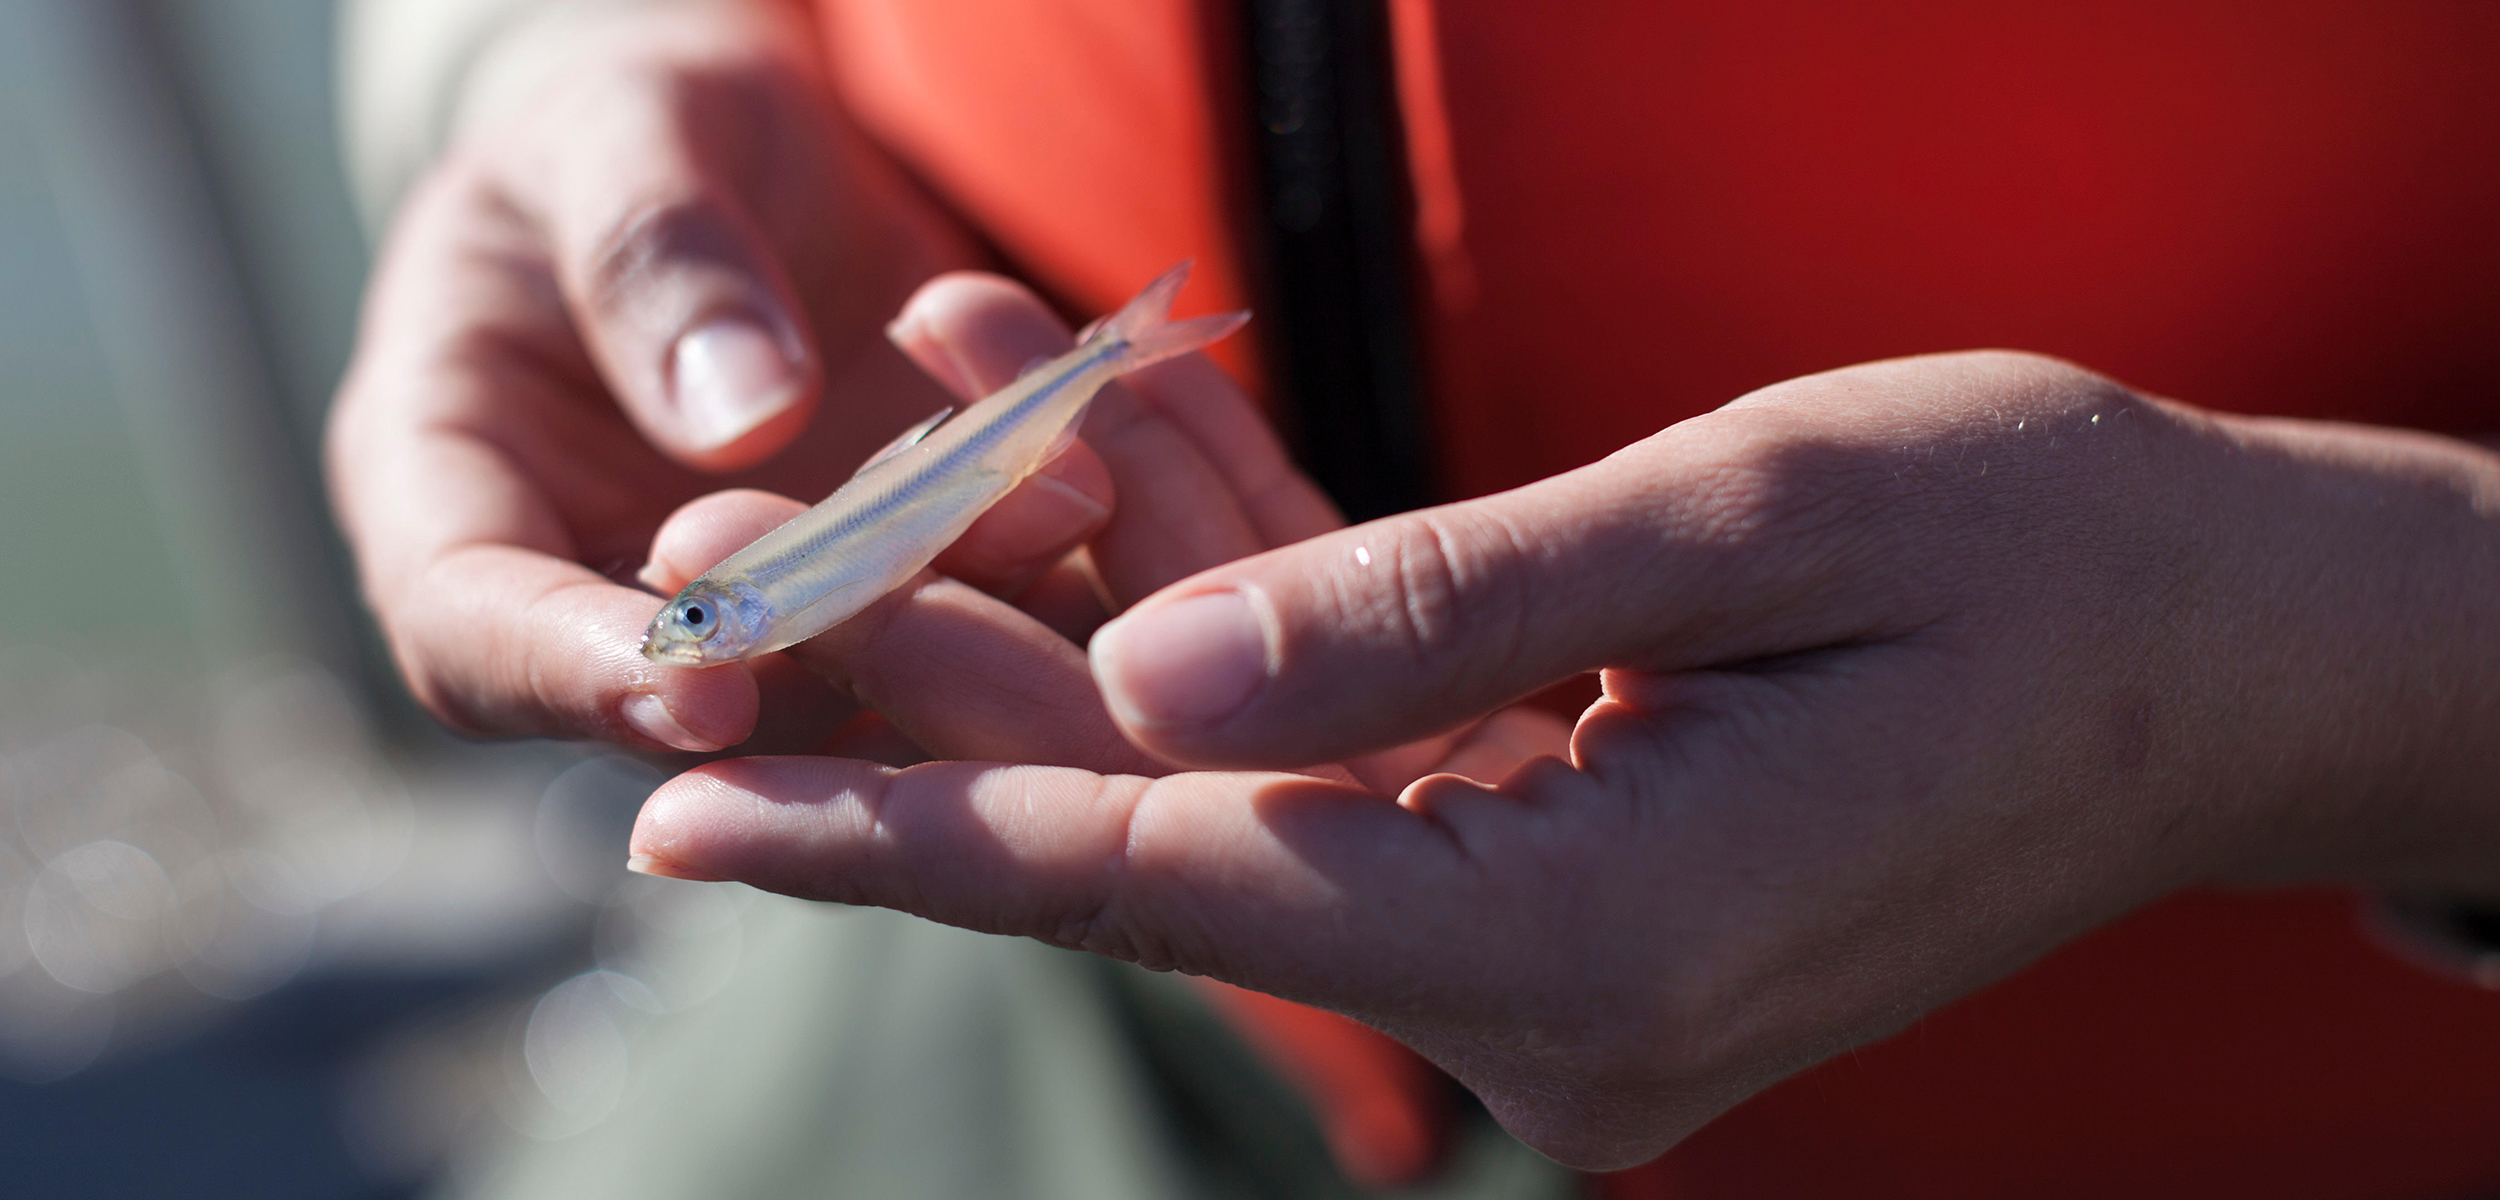 Two white hands holding a small silvery fish